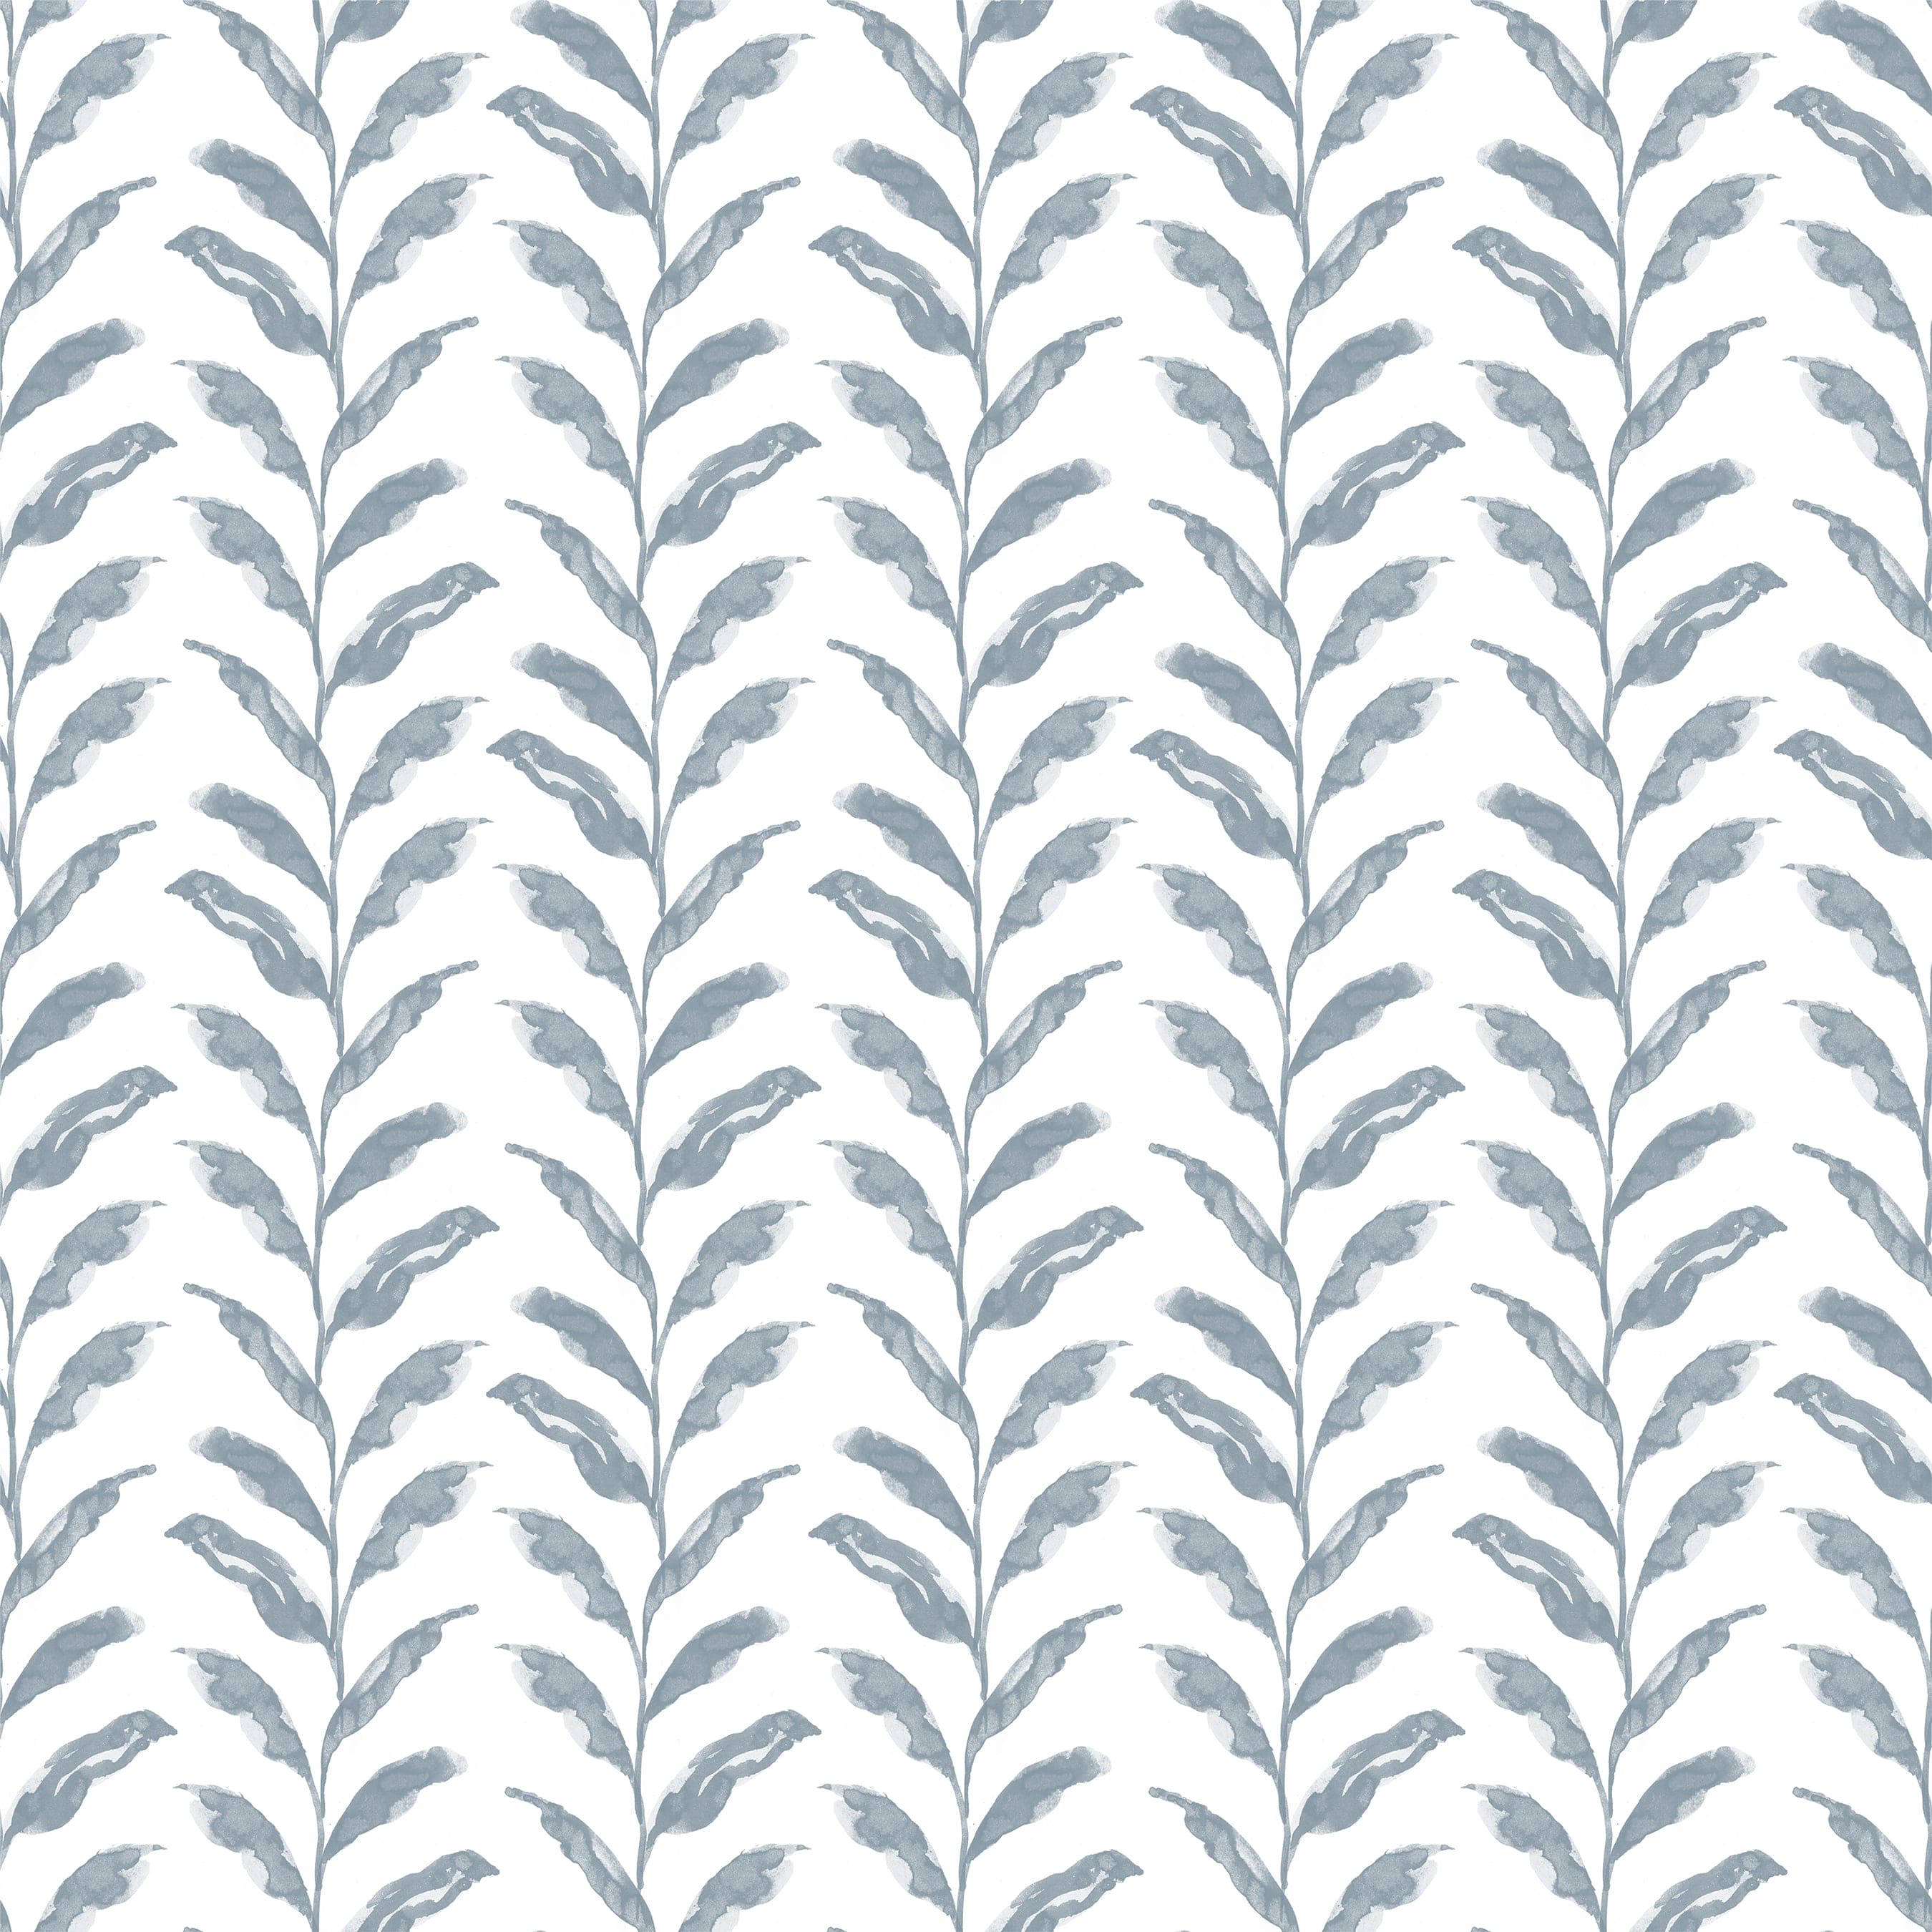 Seamless pattern of pale blue floral elements resembling brush strokes on a white background, creating a soft and serene ambiance.